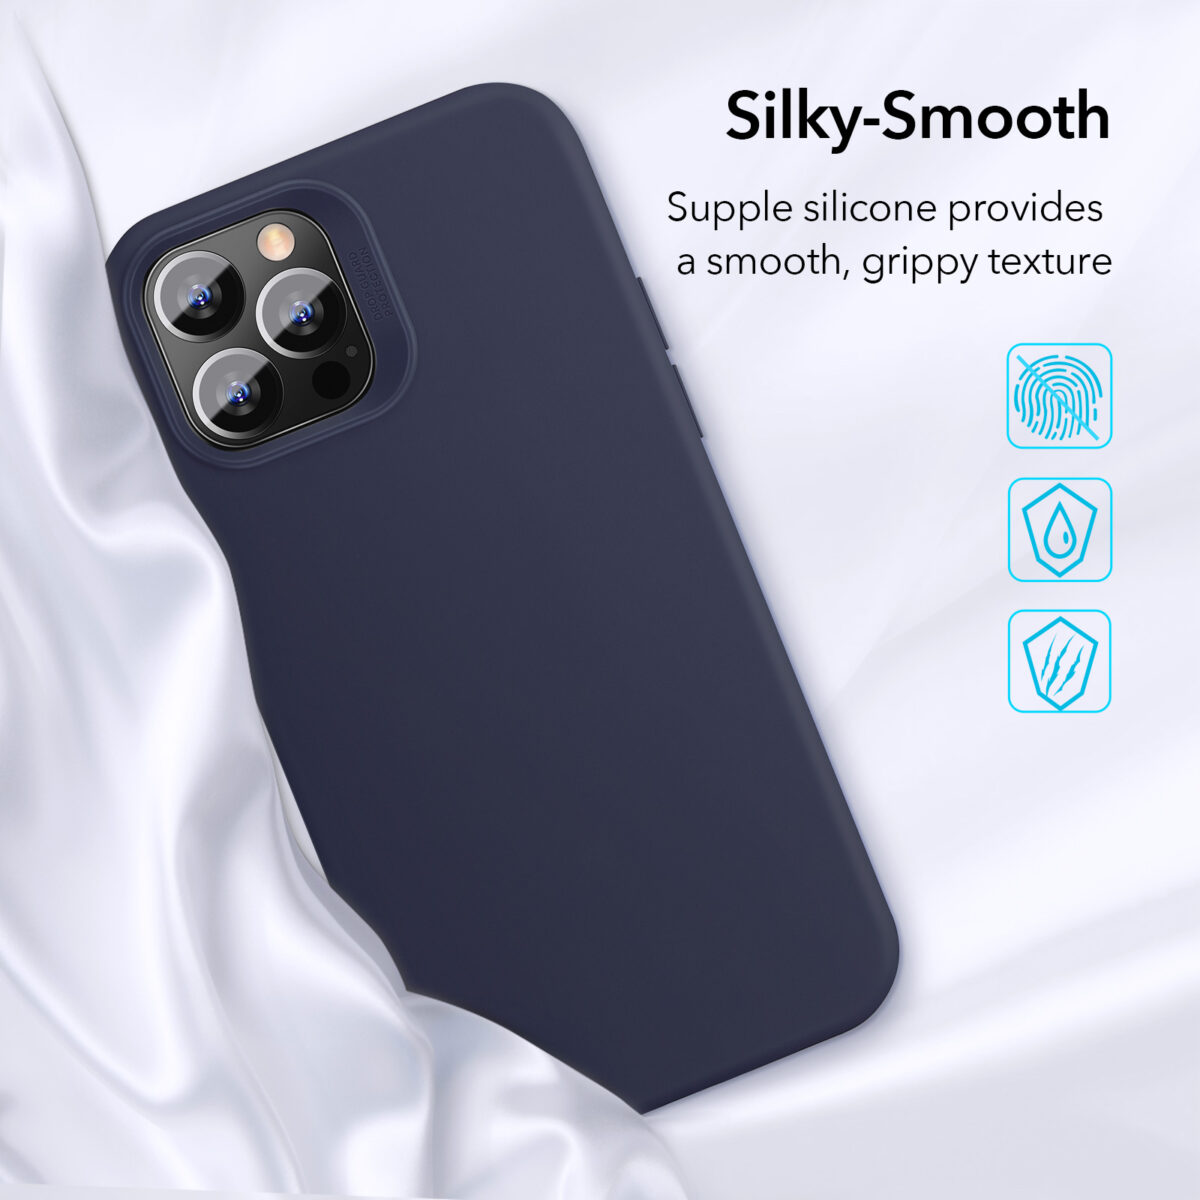 ESR Soft Silky smooth silicone case for iPhone 12 Pro